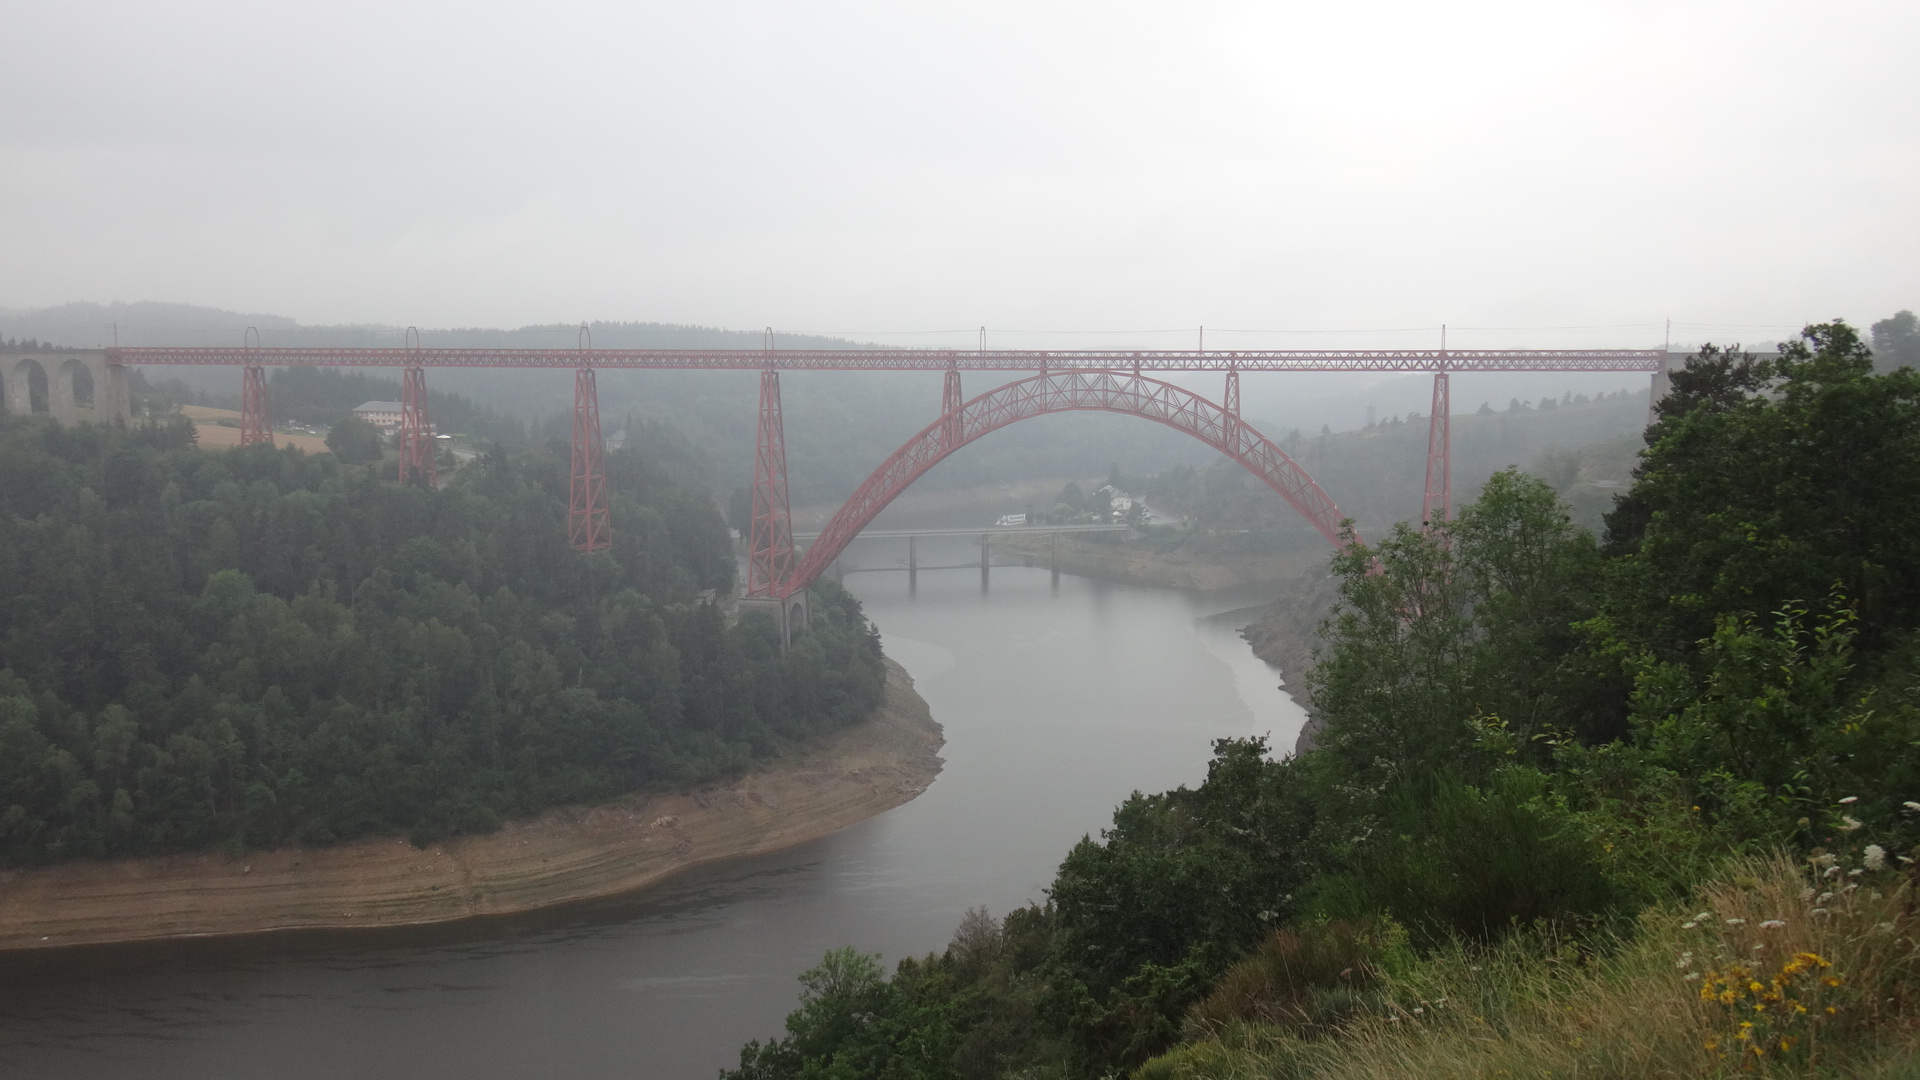 there is a large bridge that runs over the river